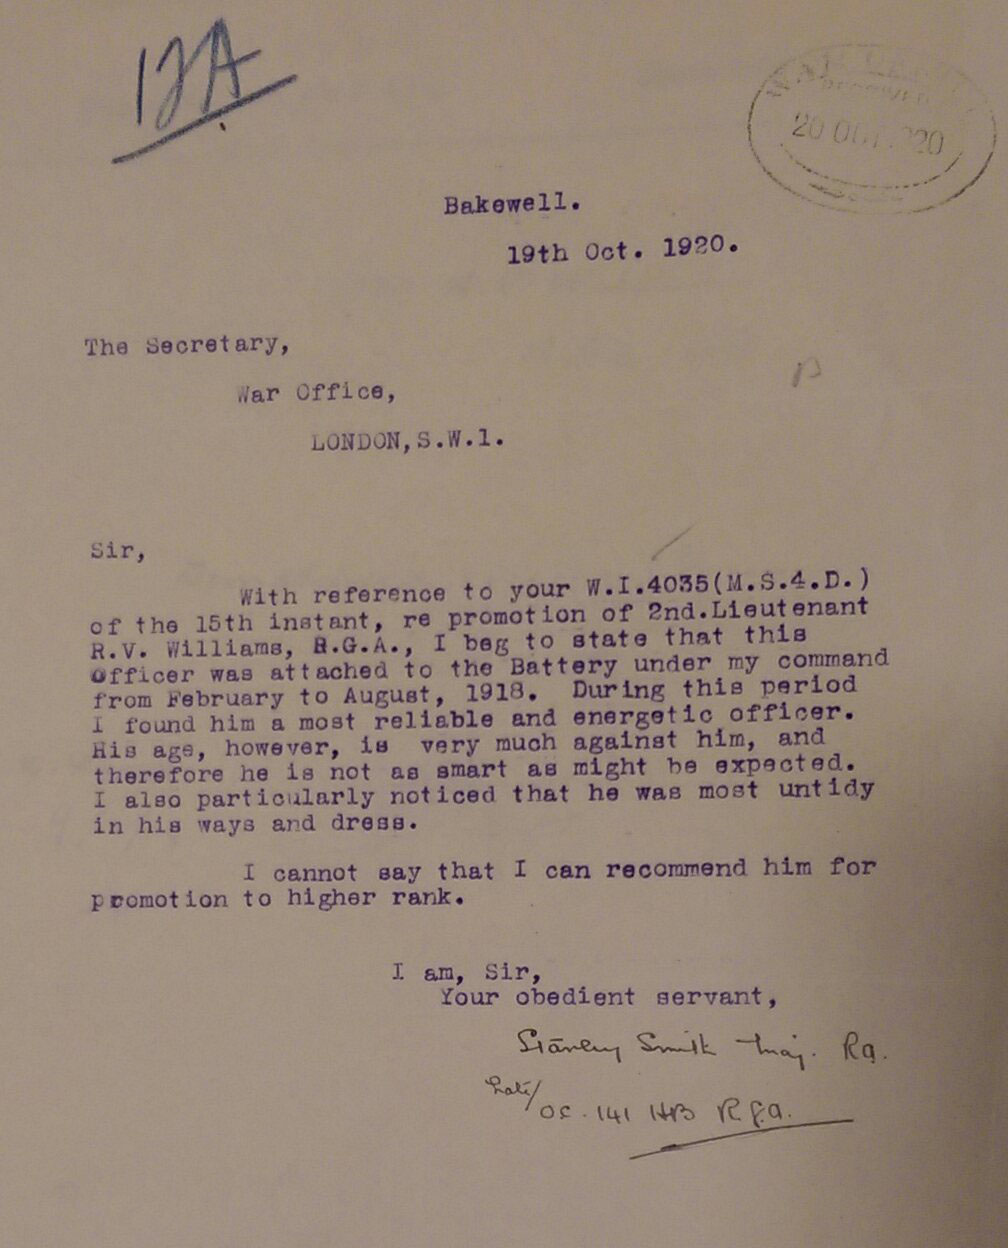 Reasons Ralph Vaughan-Williams was denied promotion in October 1920